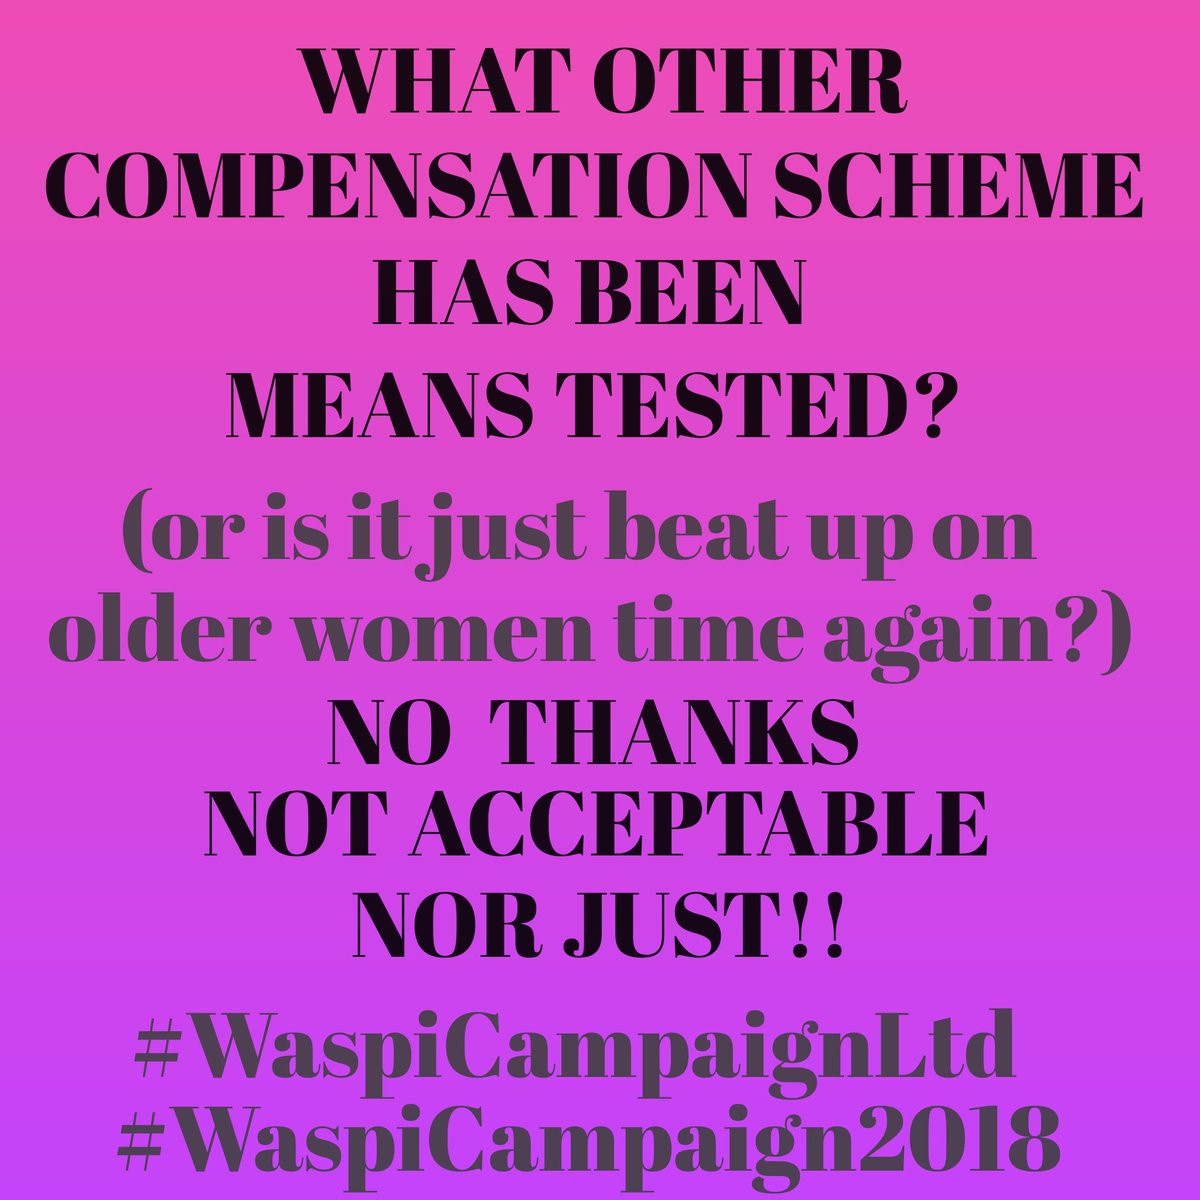 @WASPI_Campaign @WASPI_2018 In my area alone #Essex 100,000+ women potentially affected by #maladministration by #DWP We have waited too patiently for too long , time to have read #WarAndPeace let alone 100 page report that you've known about for ages @MelJStride #NoMeansTest